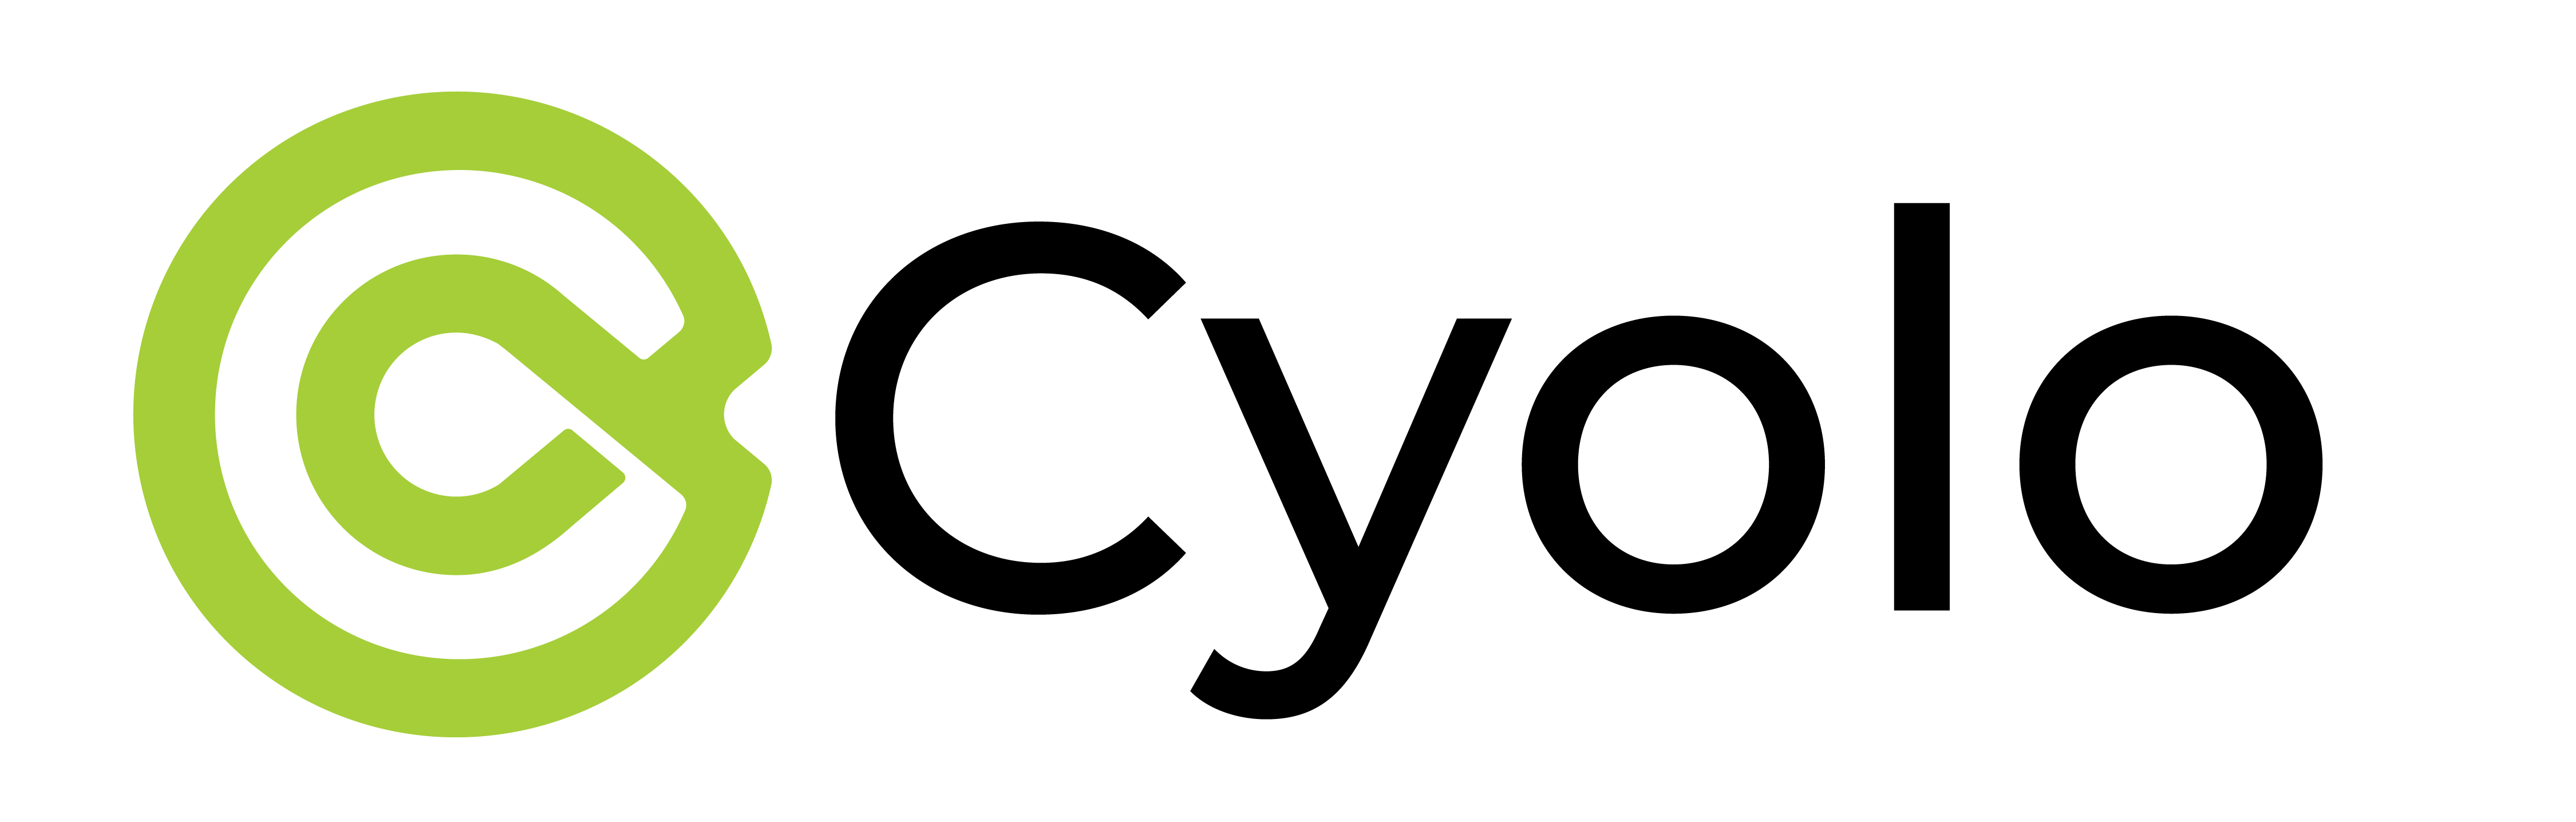 Cyolo_Logo_Colors-Green_and_Black.png